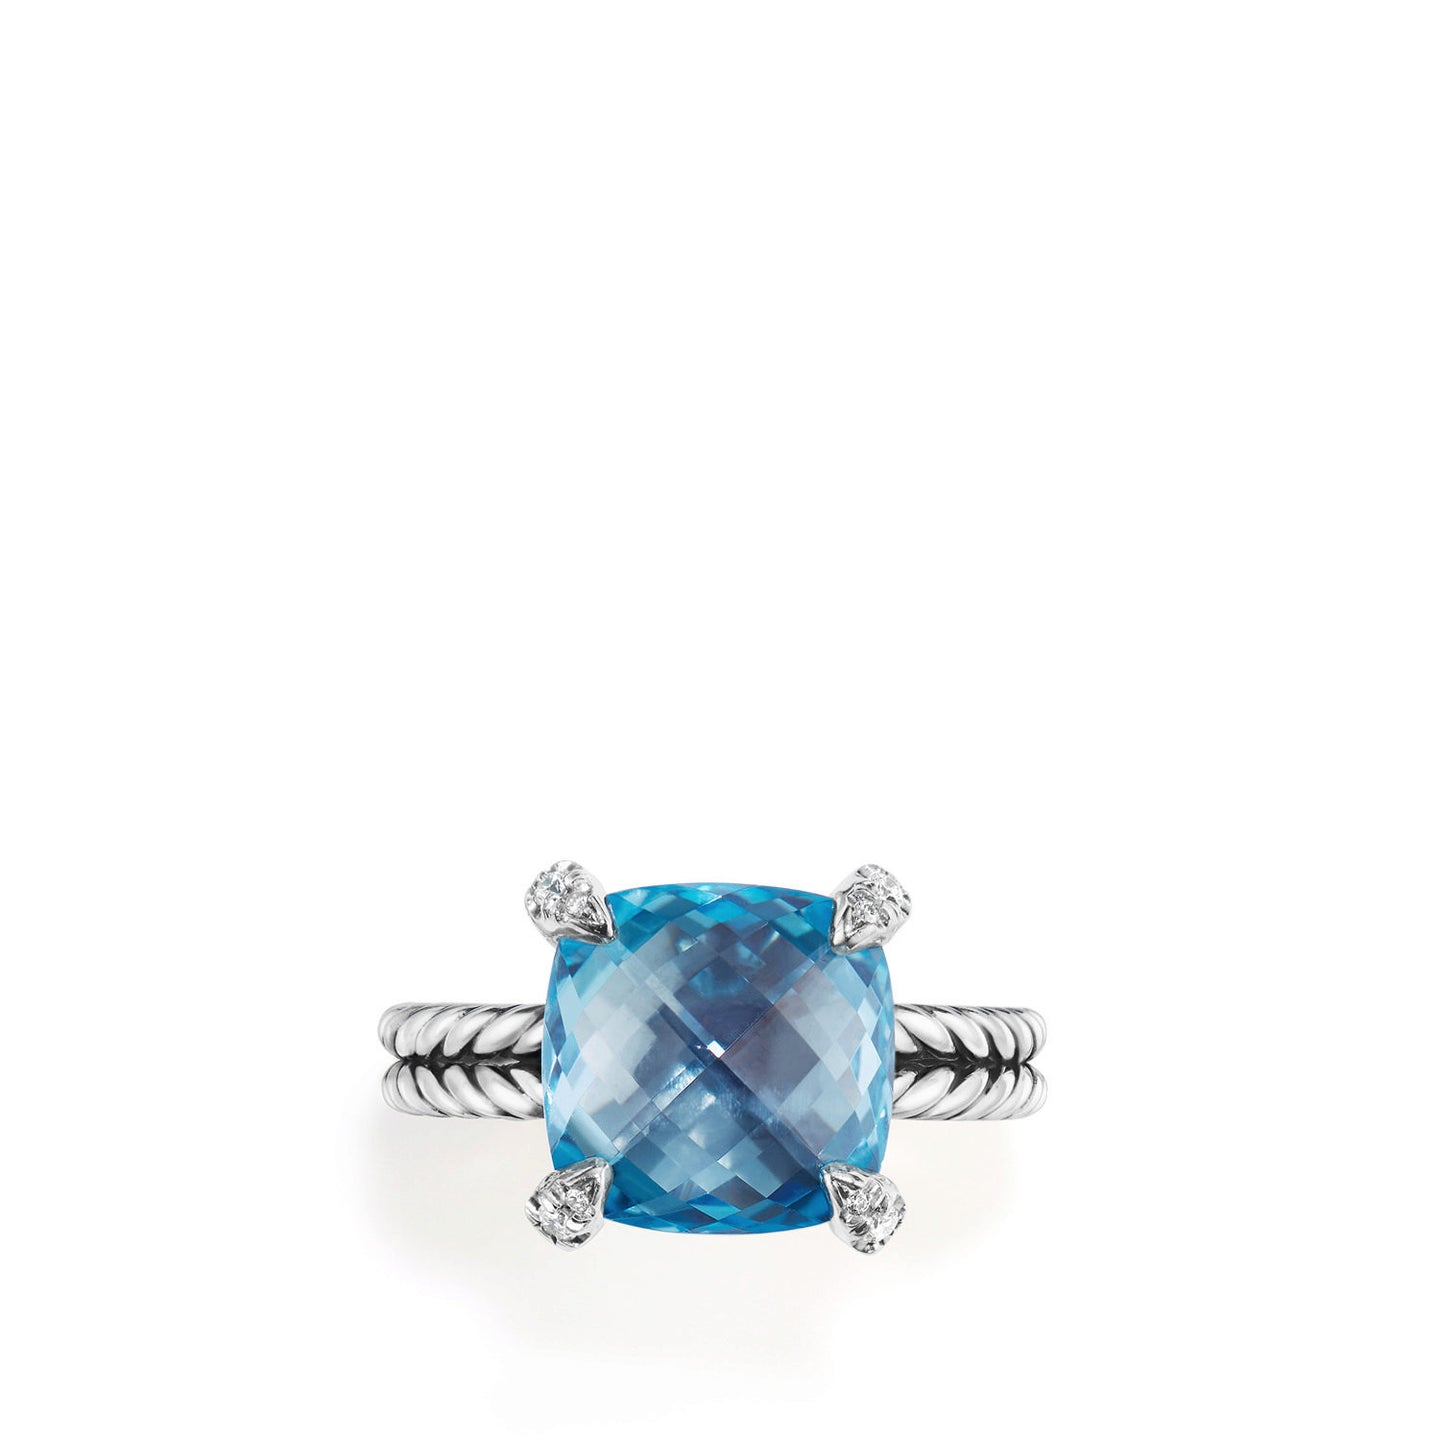 Châtelaine® Ring with Blue Topaz and Diamonds, 11mm, Size 7